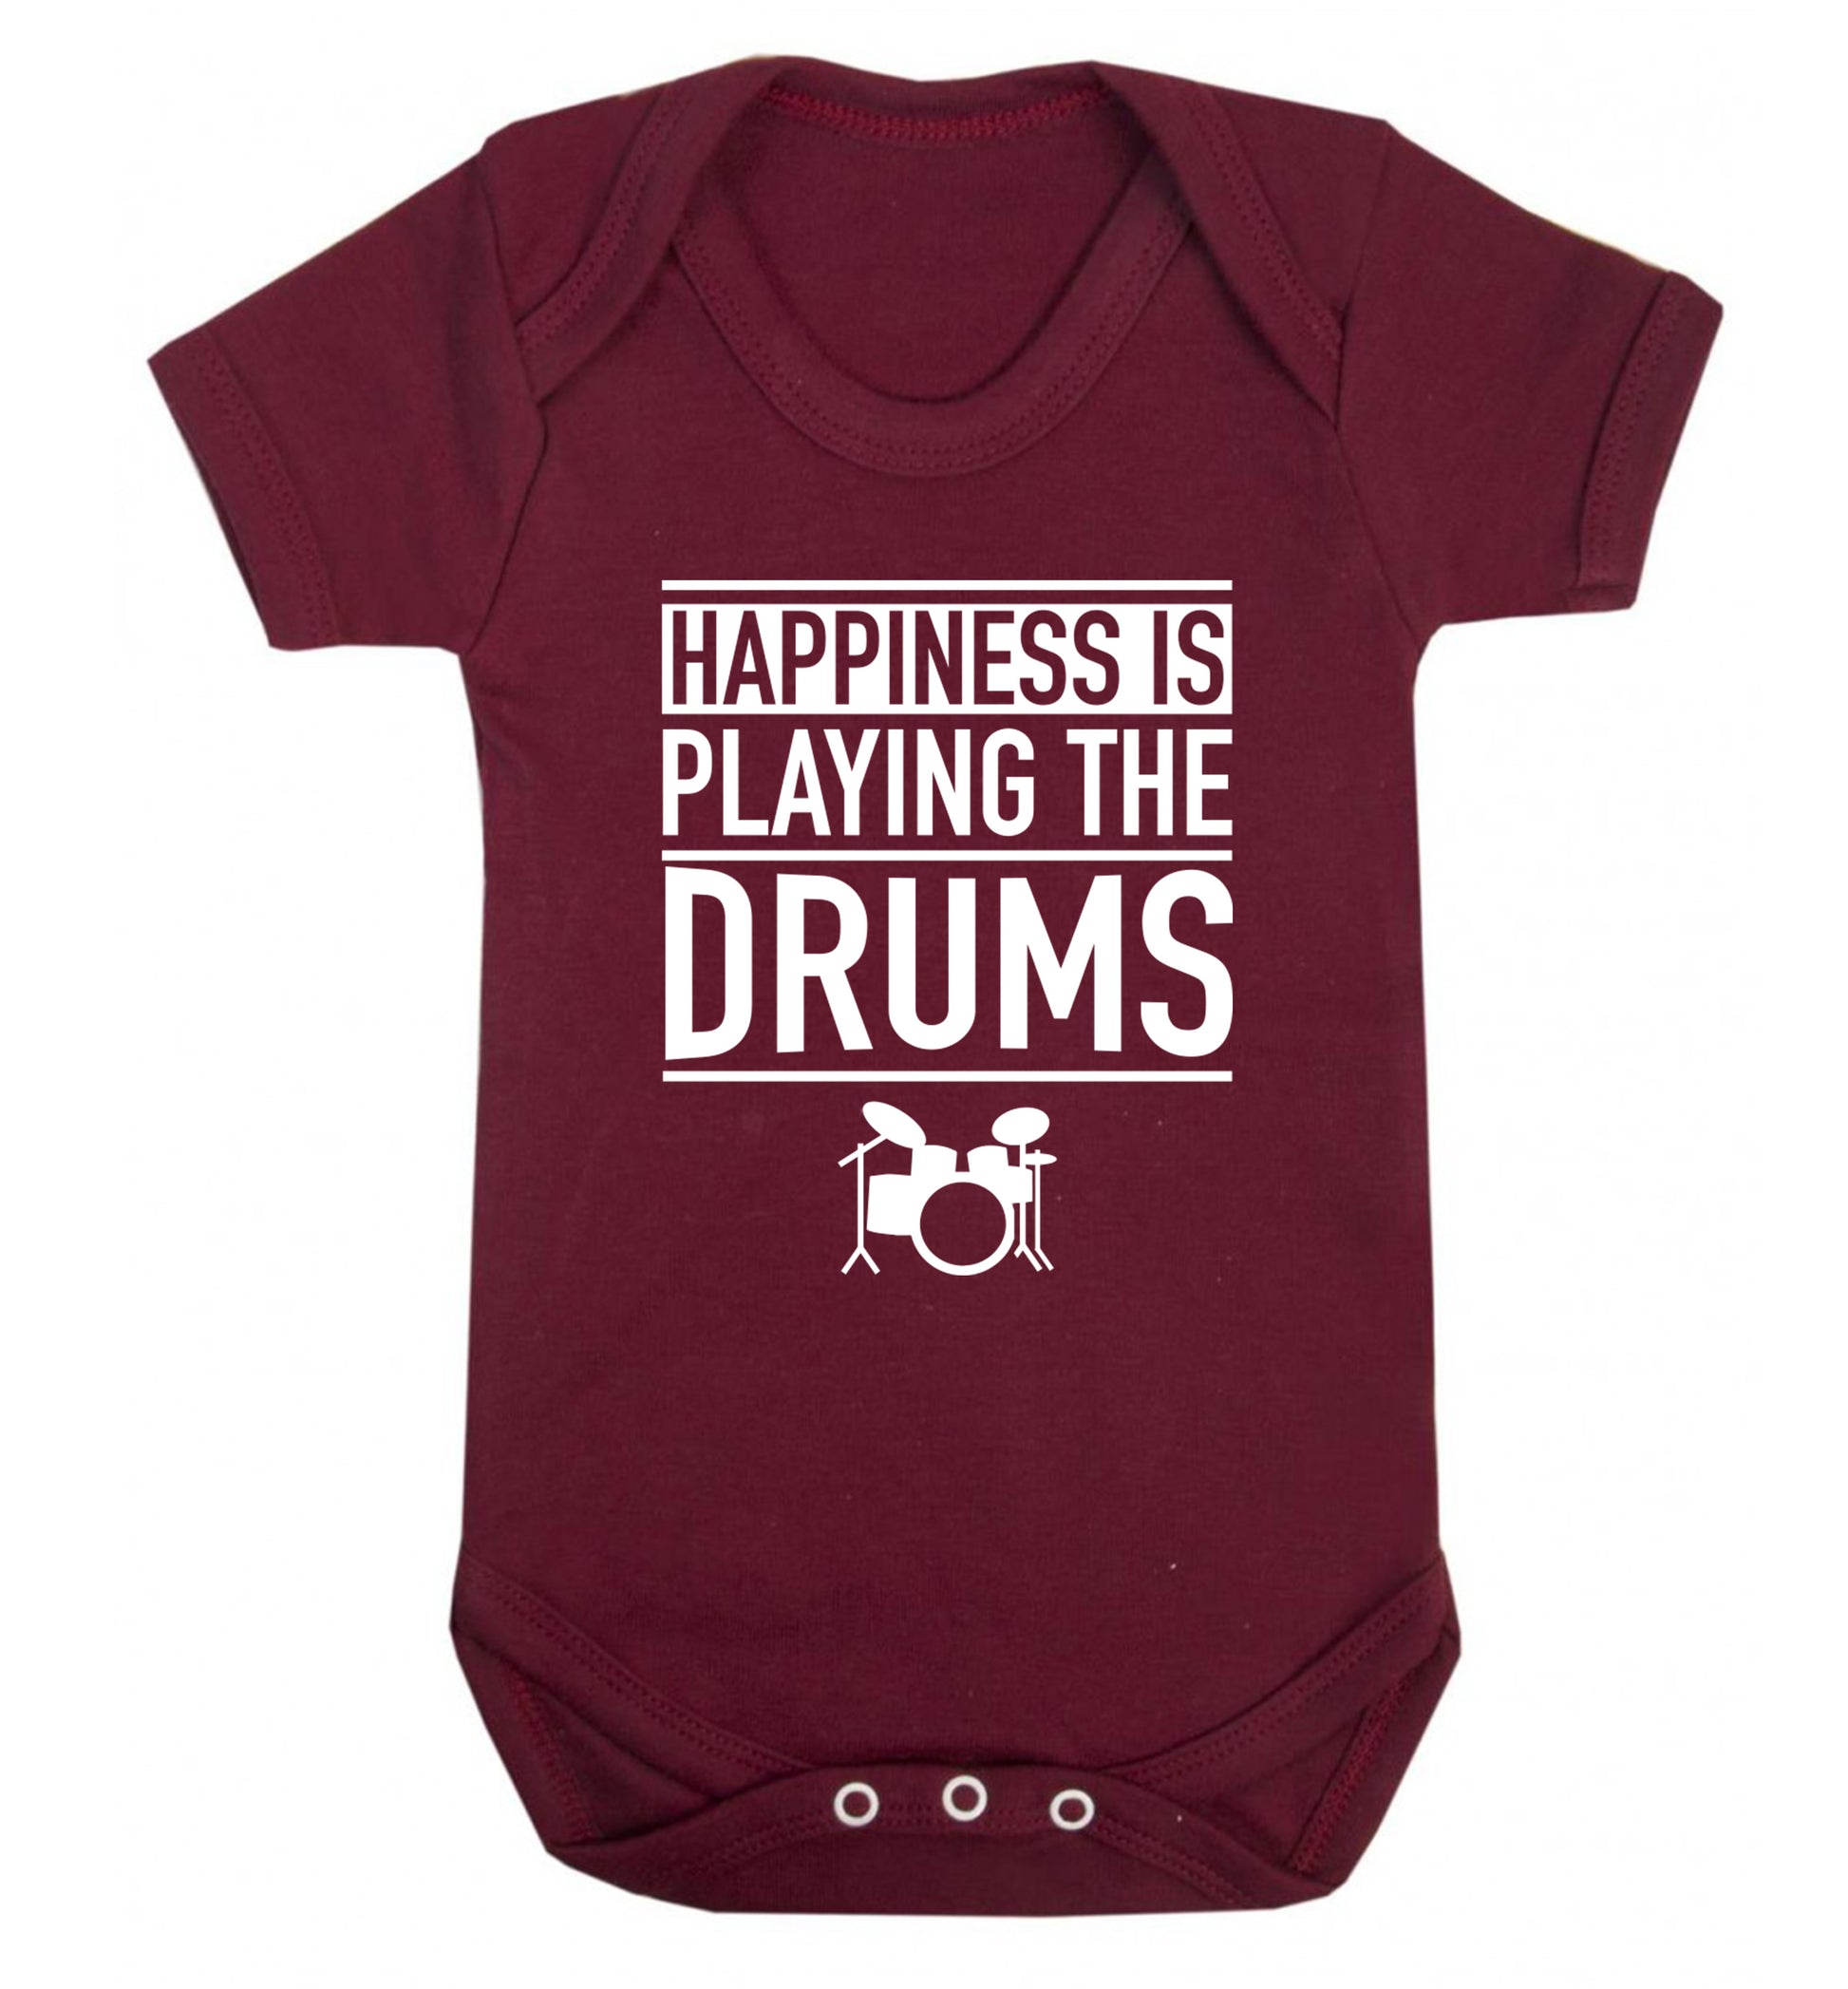 Happiness is playing the drums Baby Vest maroon 18-24 months